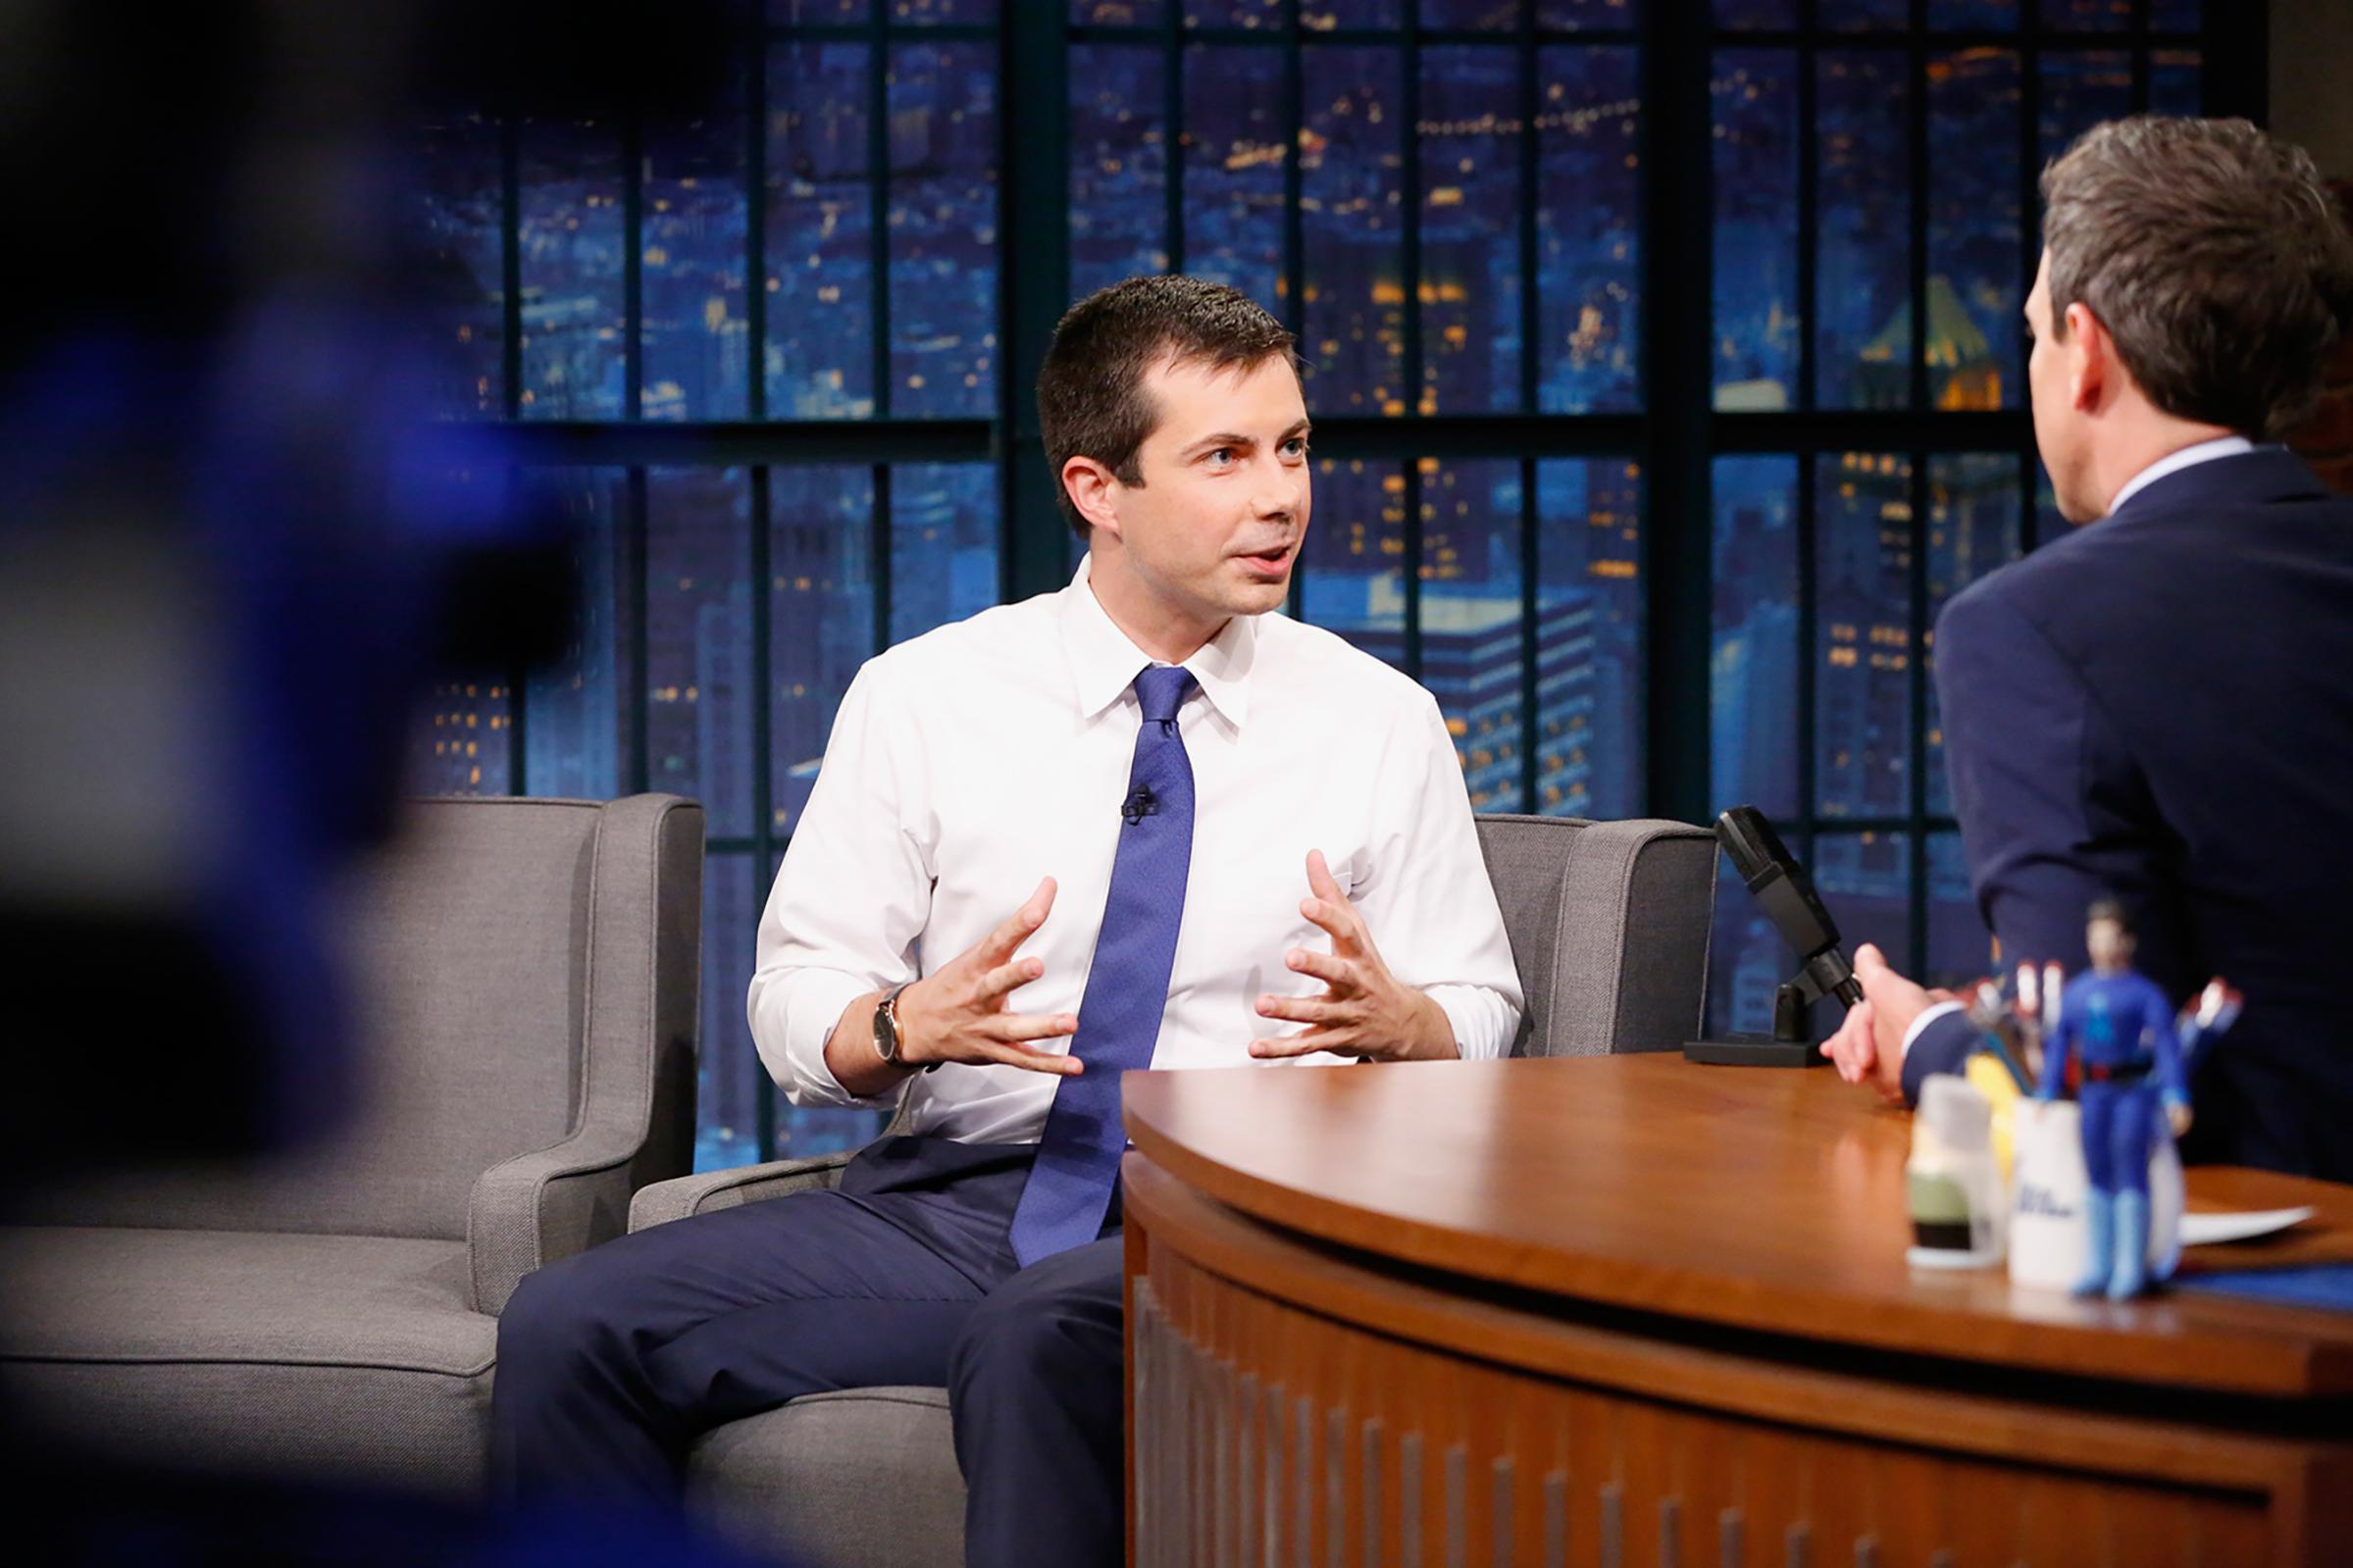 Pete Buttigieg - The 35-year-old view of national security was shaped by serving in Afghanistan